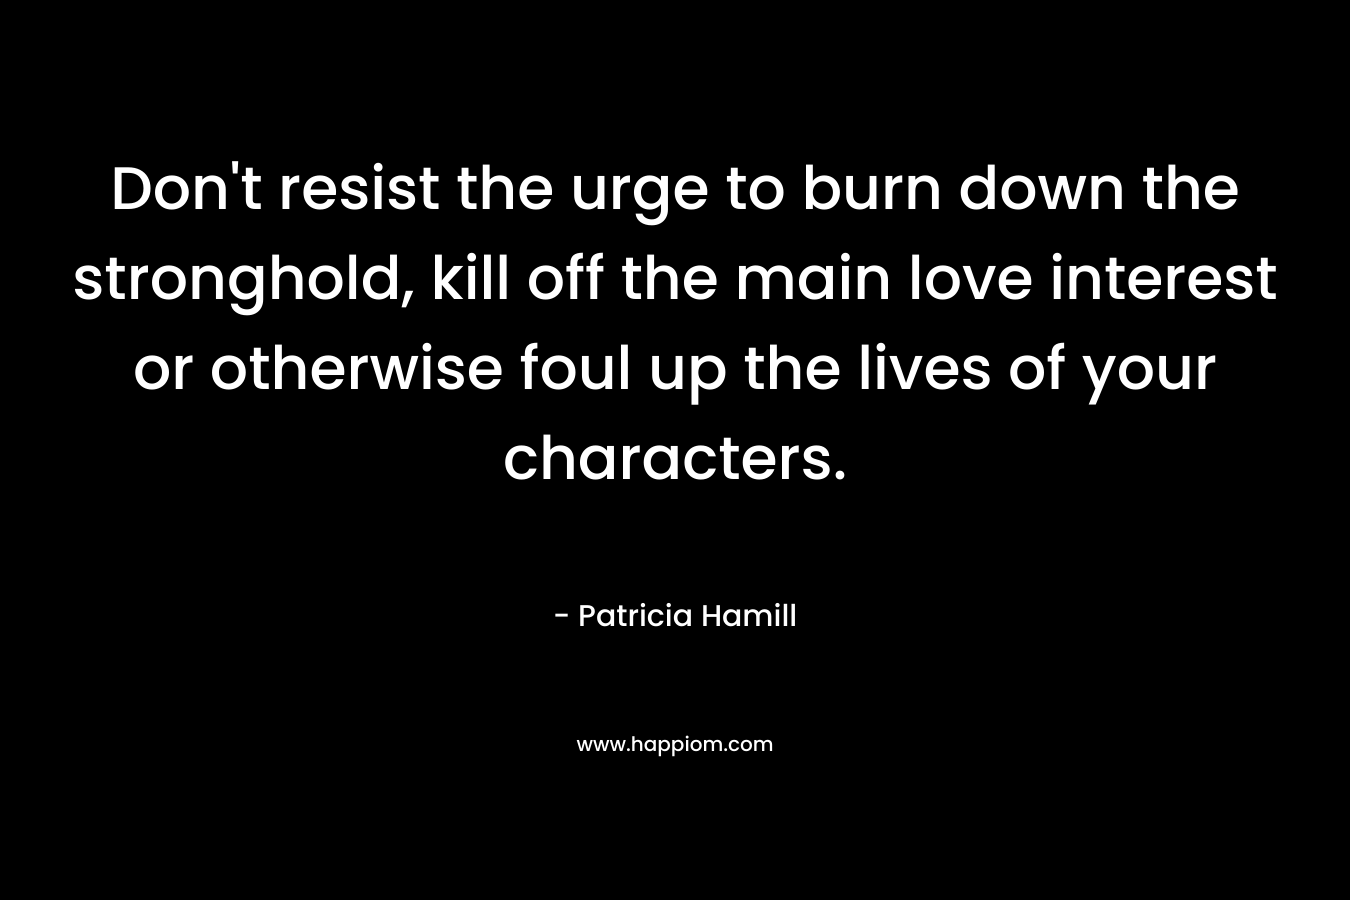 Don’t resist the urge to burn down the stronghold, kill off the main love interest or otherwise foul up the lives of your characters. – Patricia Hamill